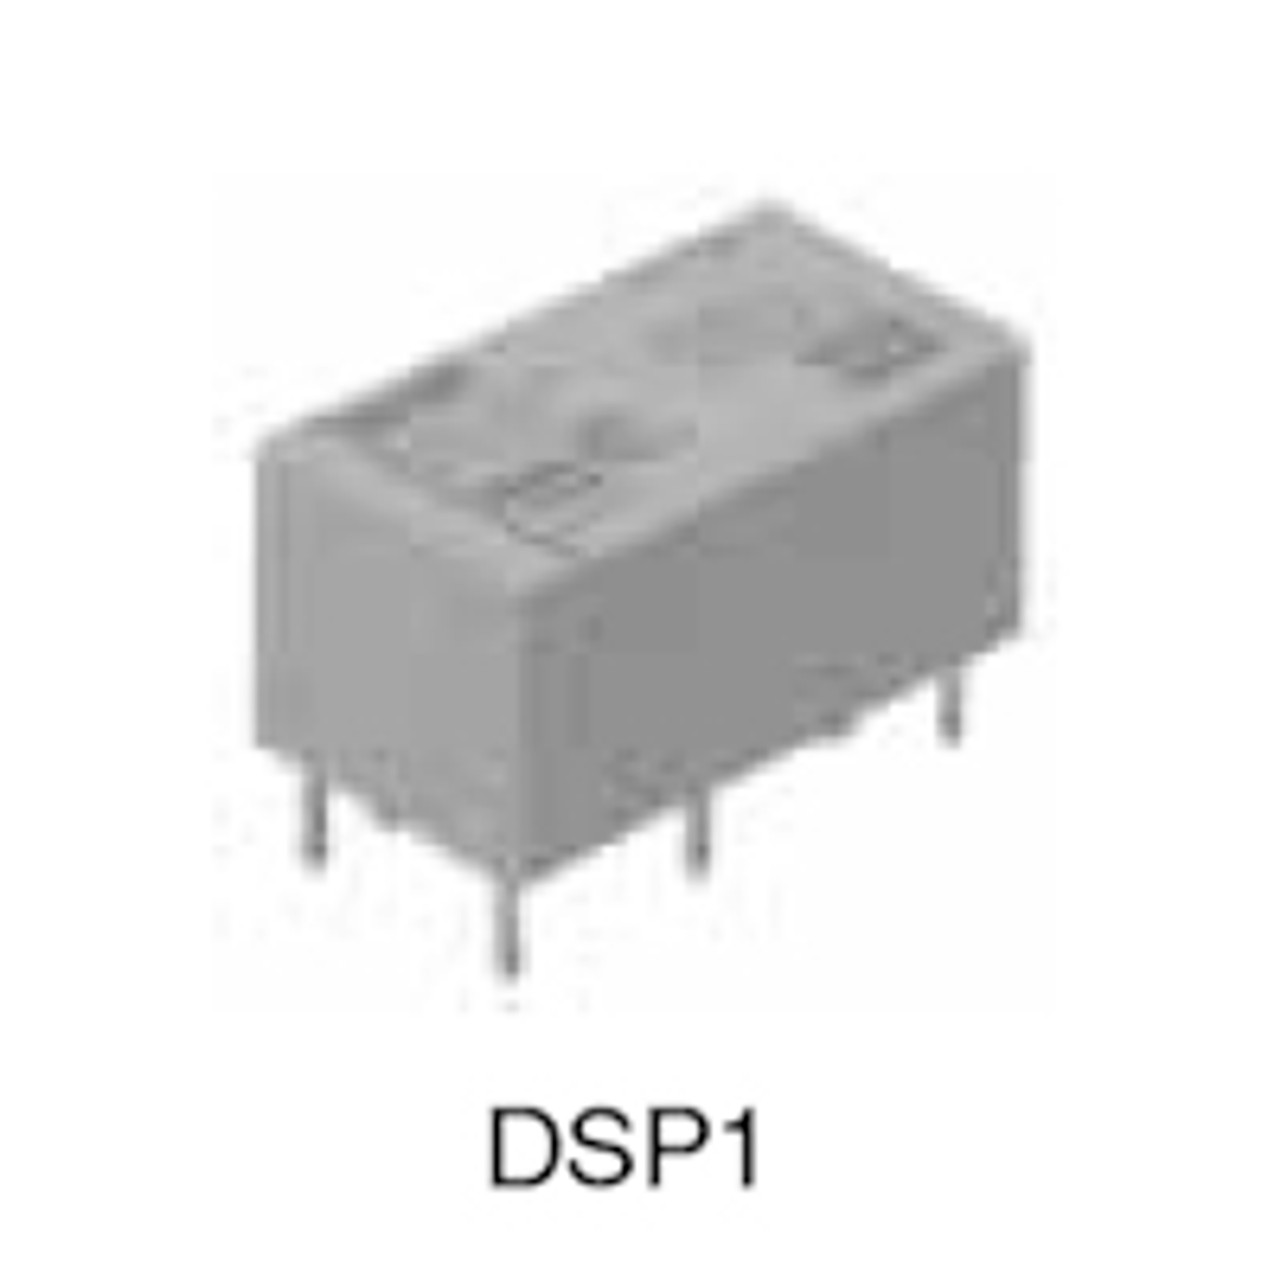 Panasonic Electric Works DSP1-L2-DC6V-F Power Relays